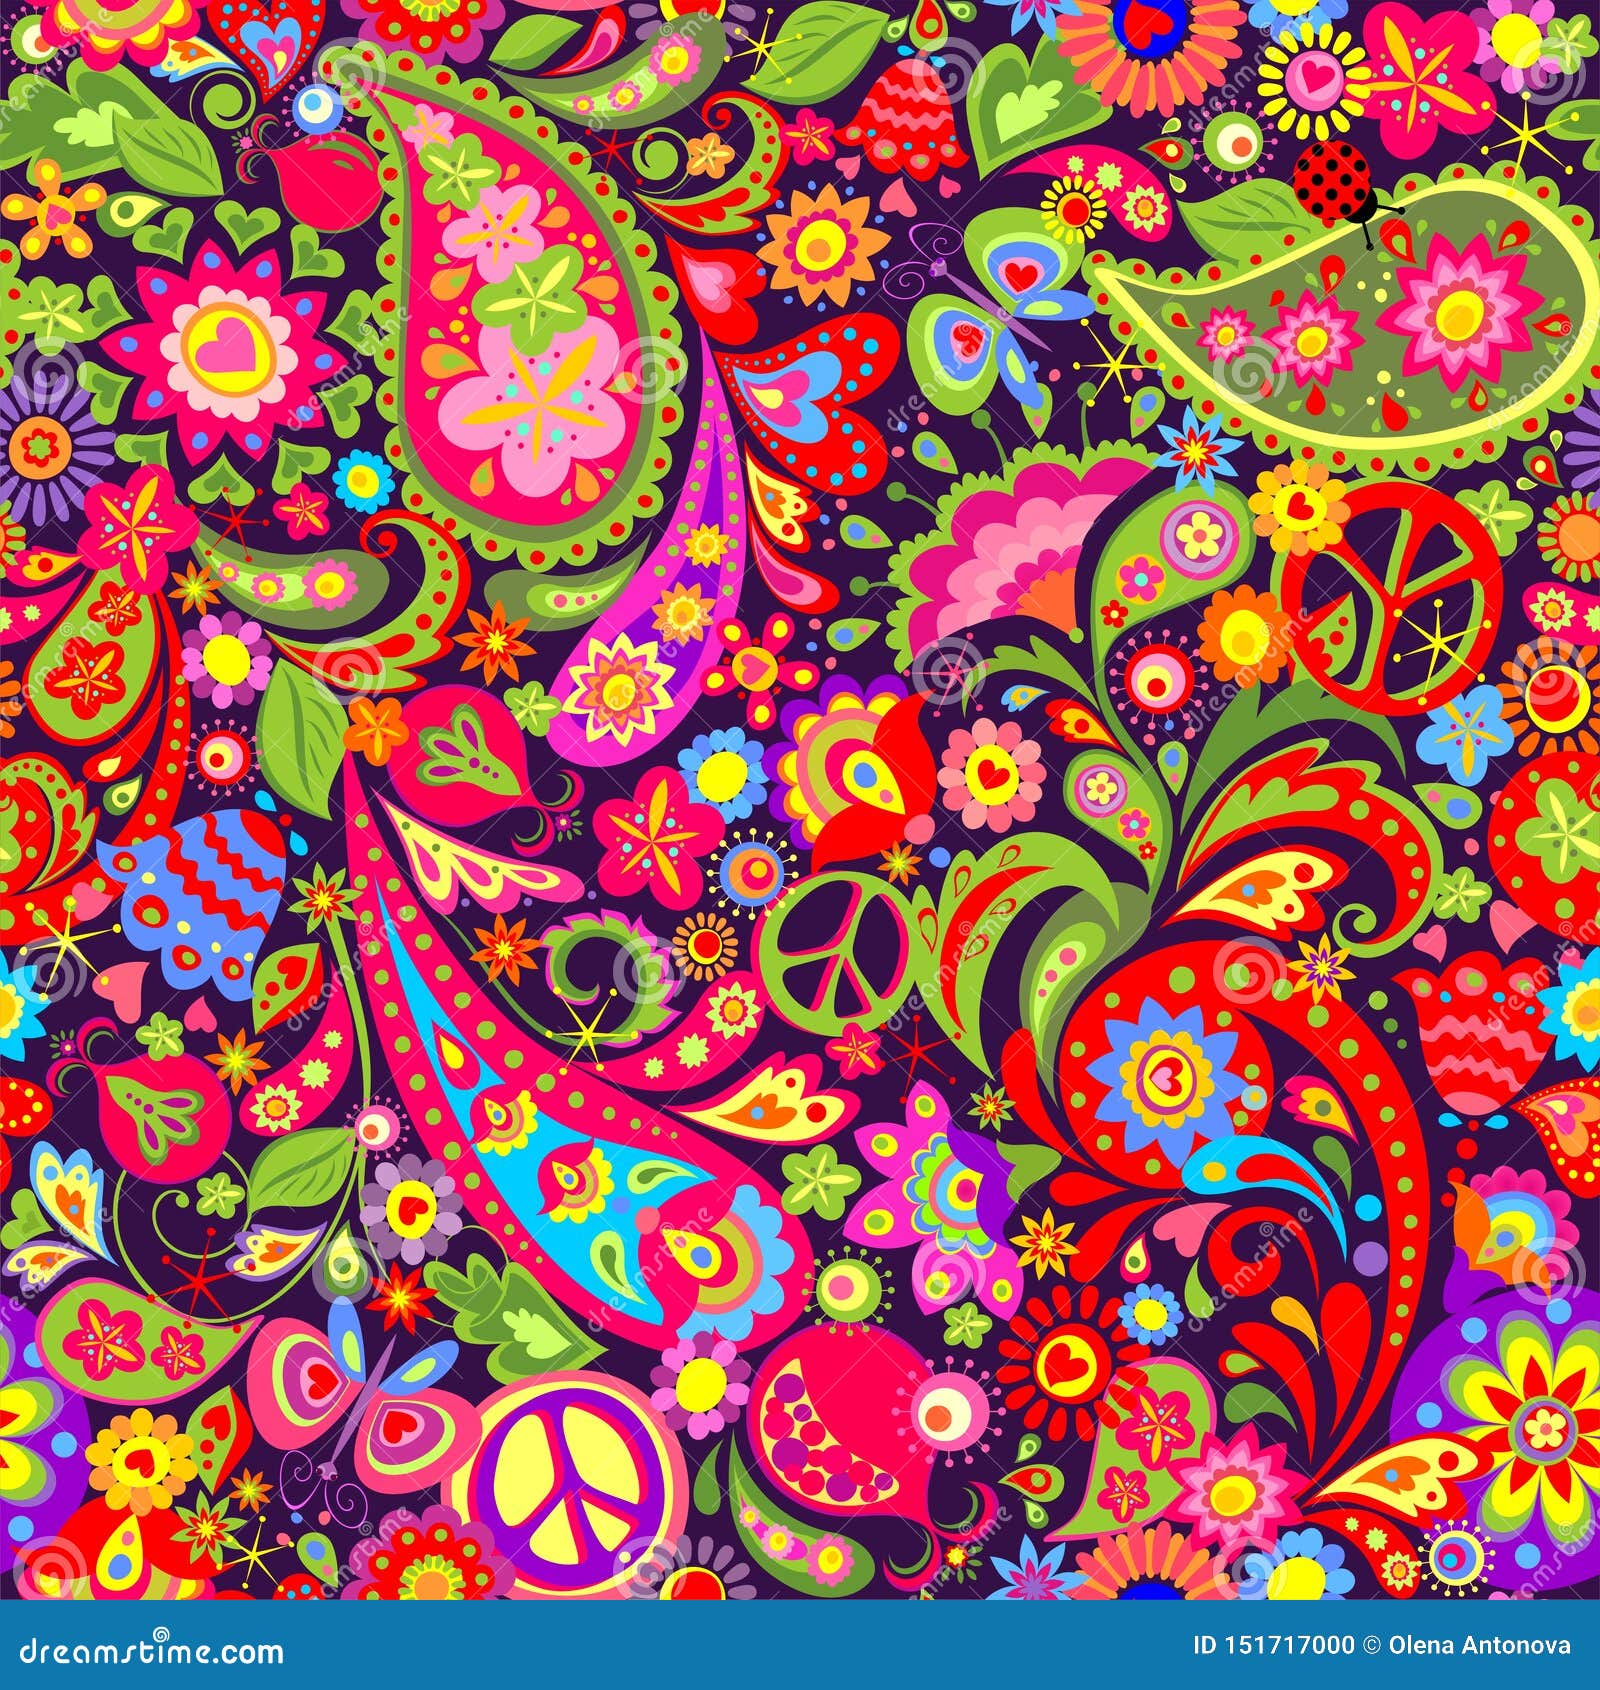 1960s Hippie Wallpaper Design Trippy Glitchy Stock Vector Royalty Free  1784882810  Shutterstock